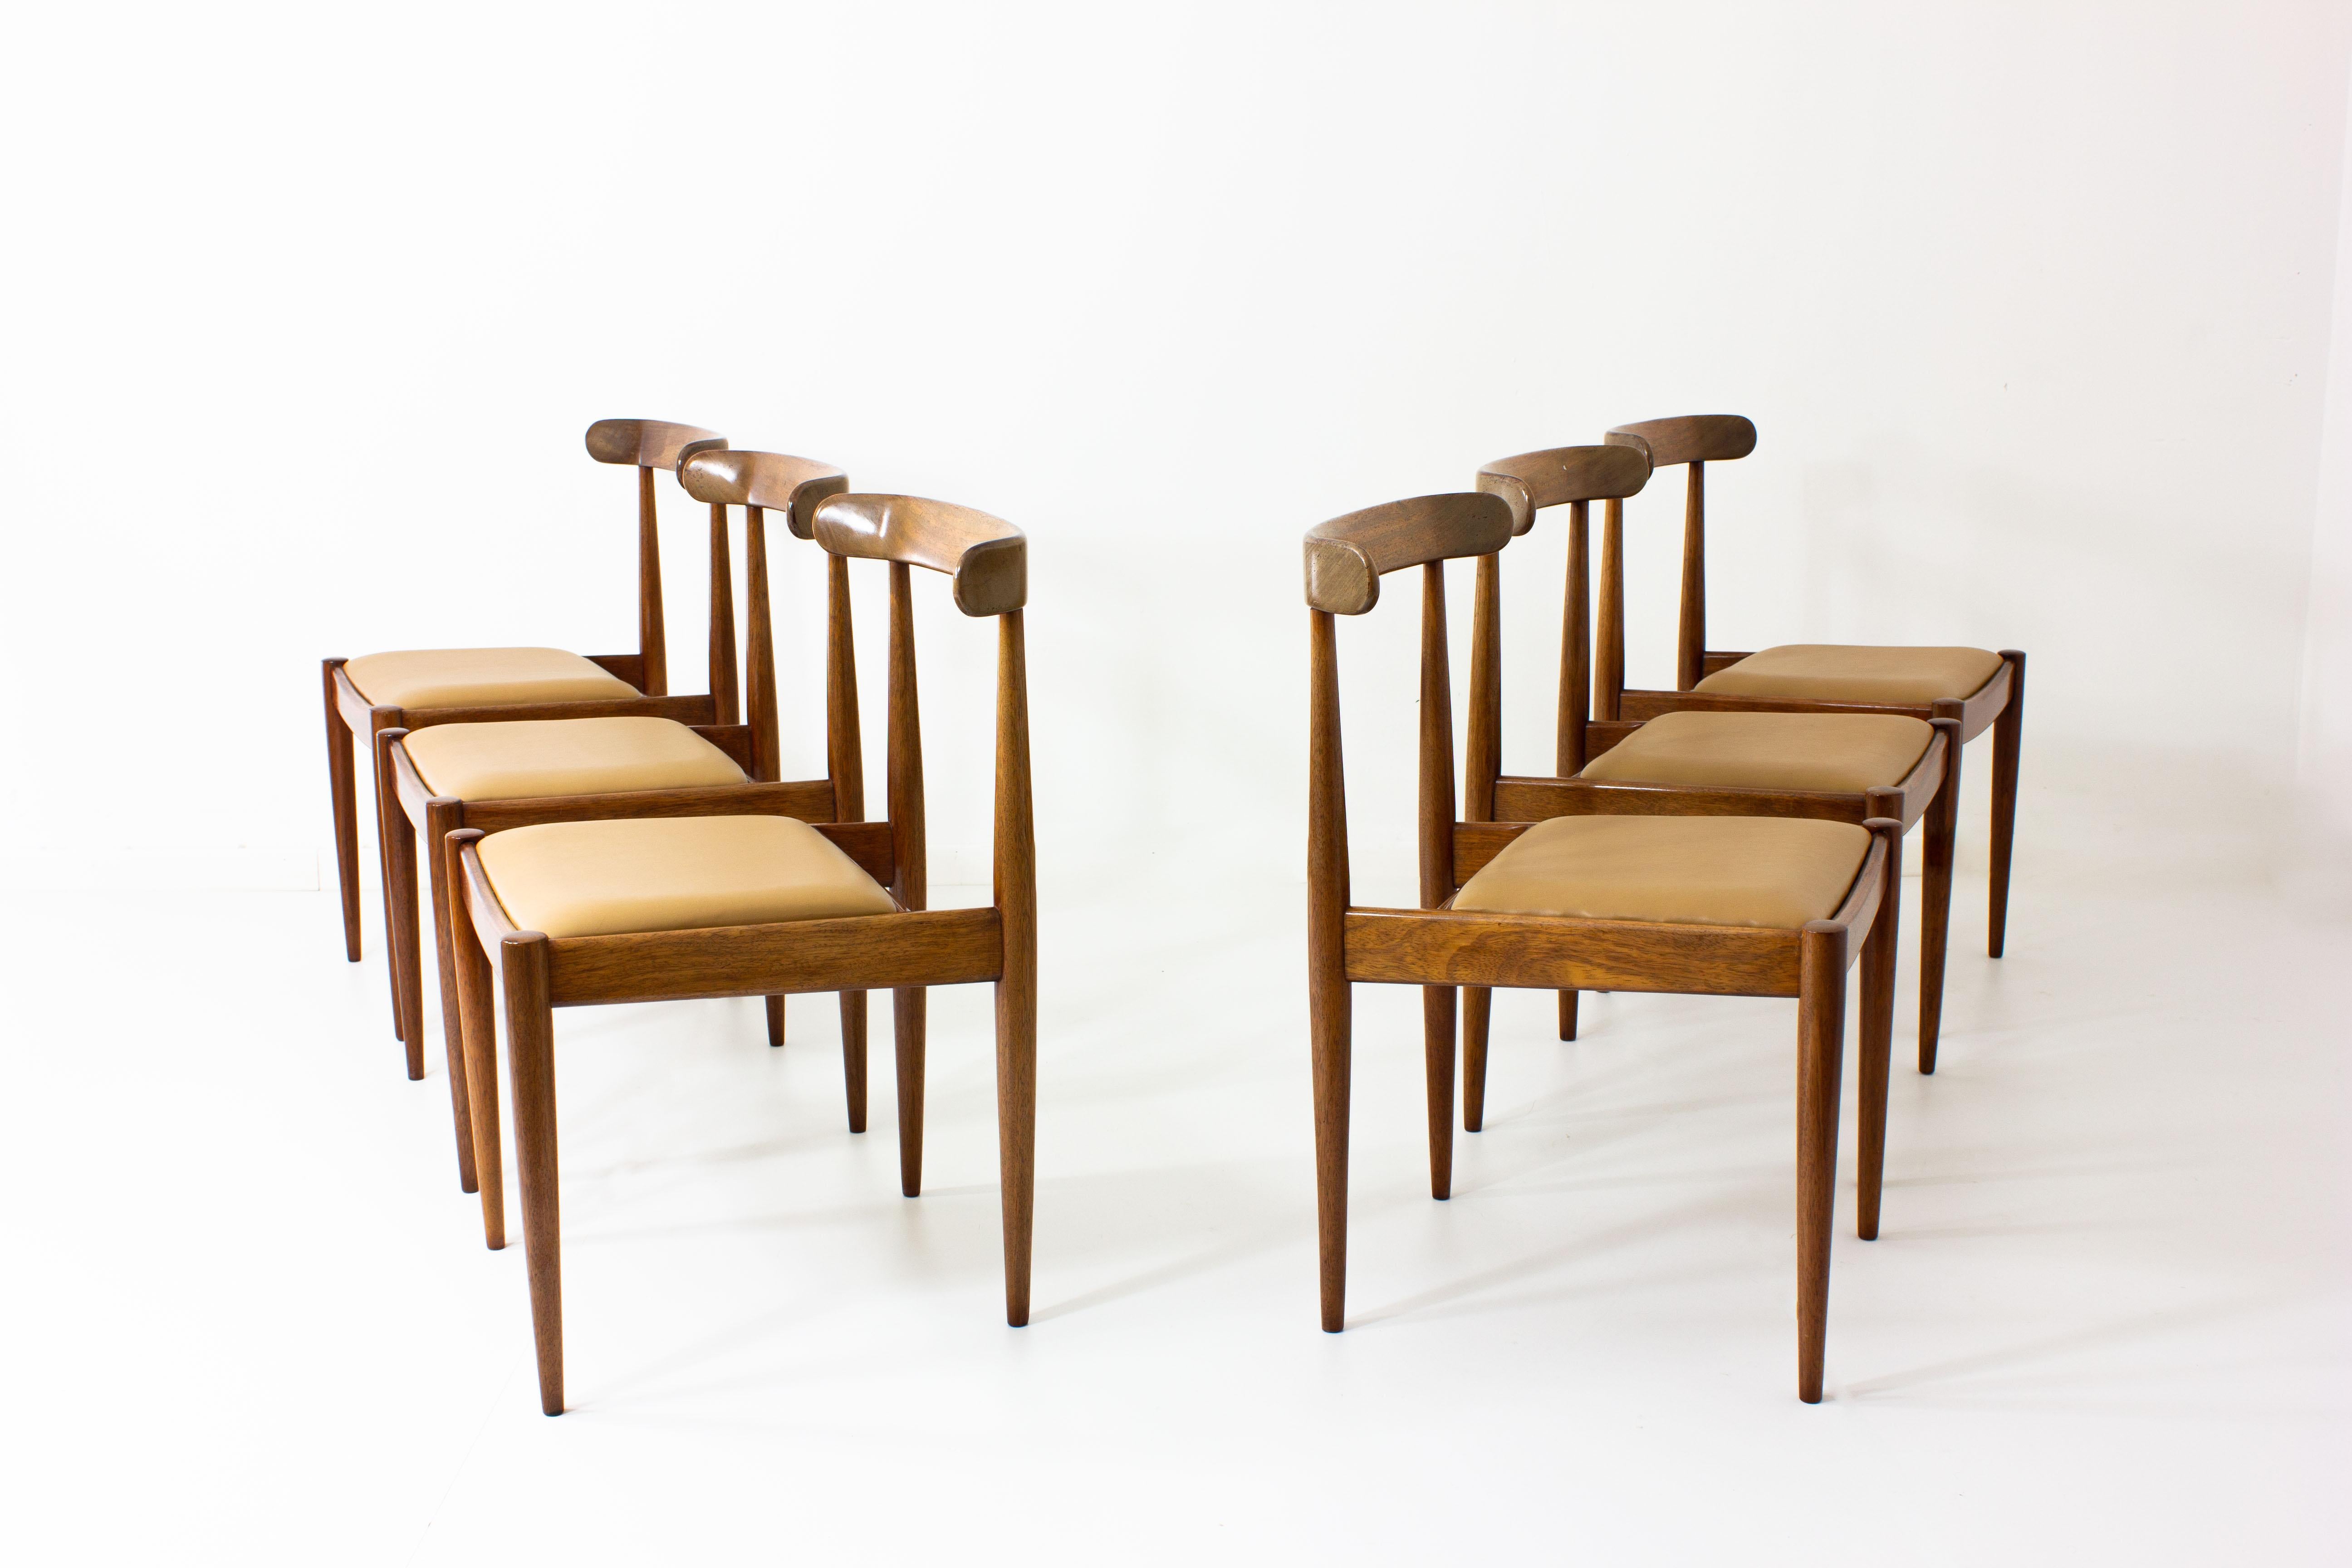 A beautiful set of 6 Bubinga Model 500 dining chairs by legendary Belgian designer Alfred Hendrickx from 1961.
The seating area is extended from the back rest which makes this chair feel very spacious and light. The solid back rest has a nice